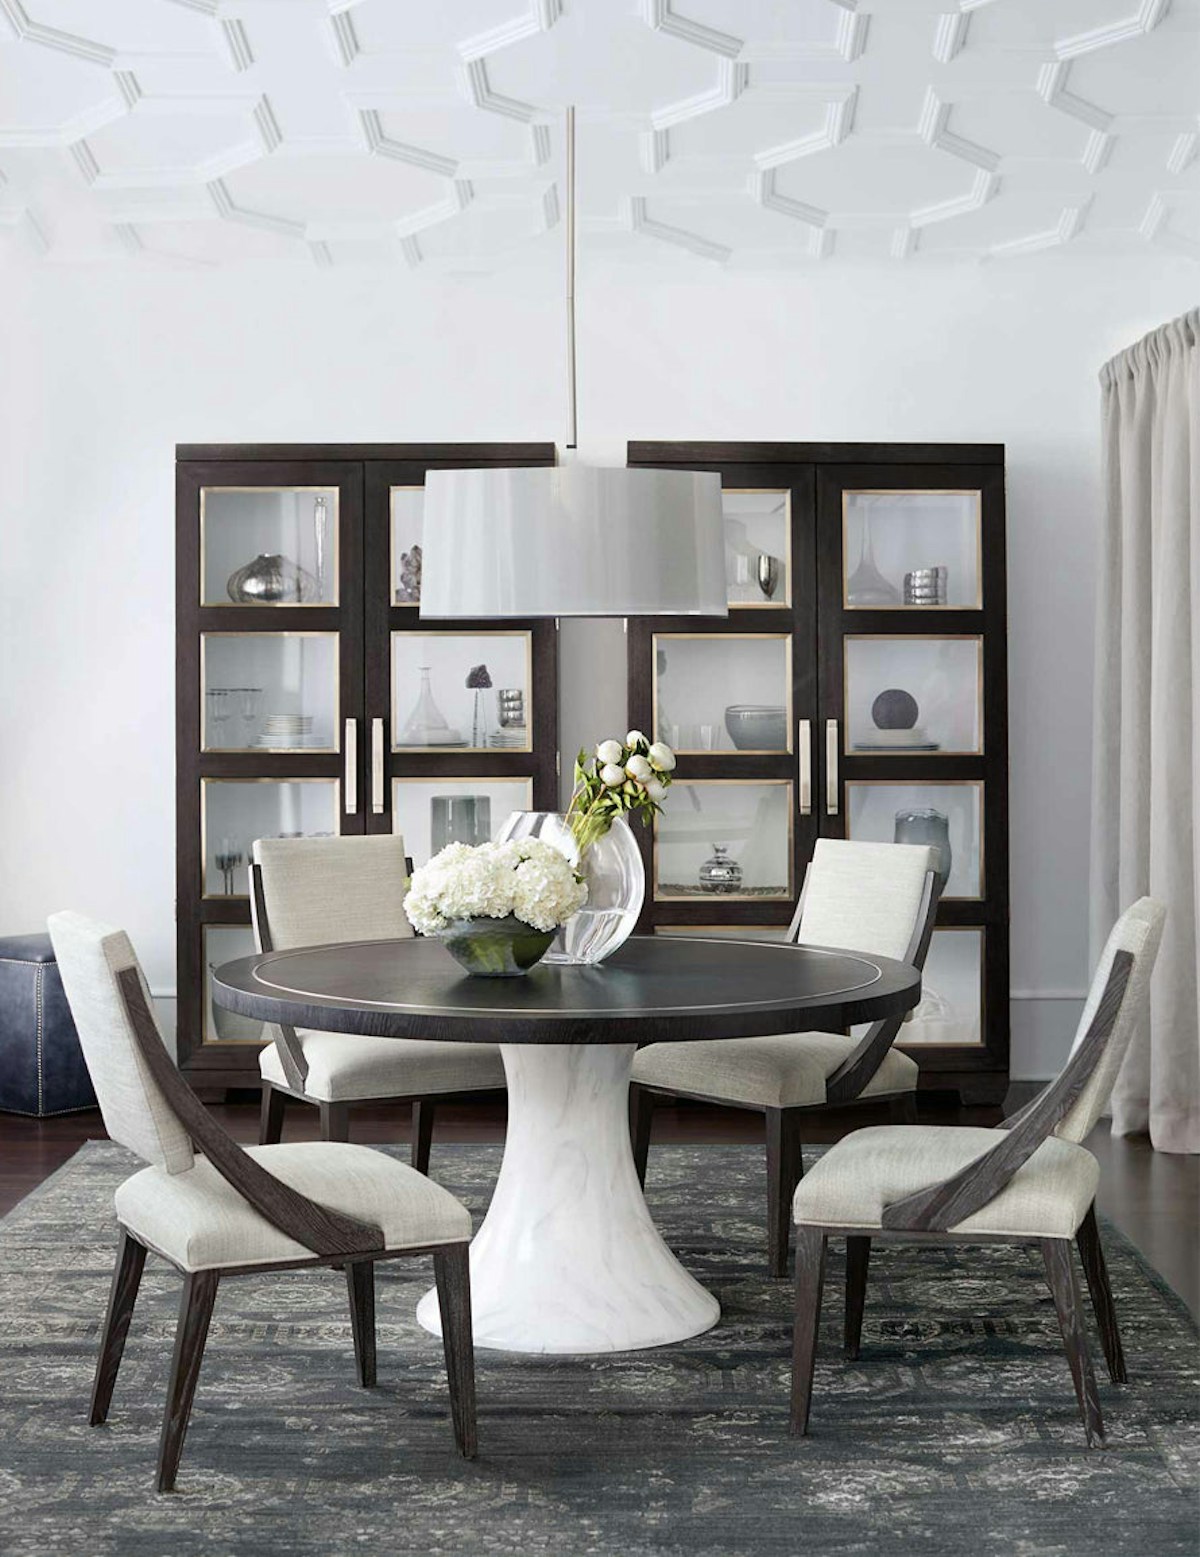 Luxury Dining Room Styles | Classic Dining Room | Bernhardt Furniture | Read more in The Luxurist at LuxDeco.com